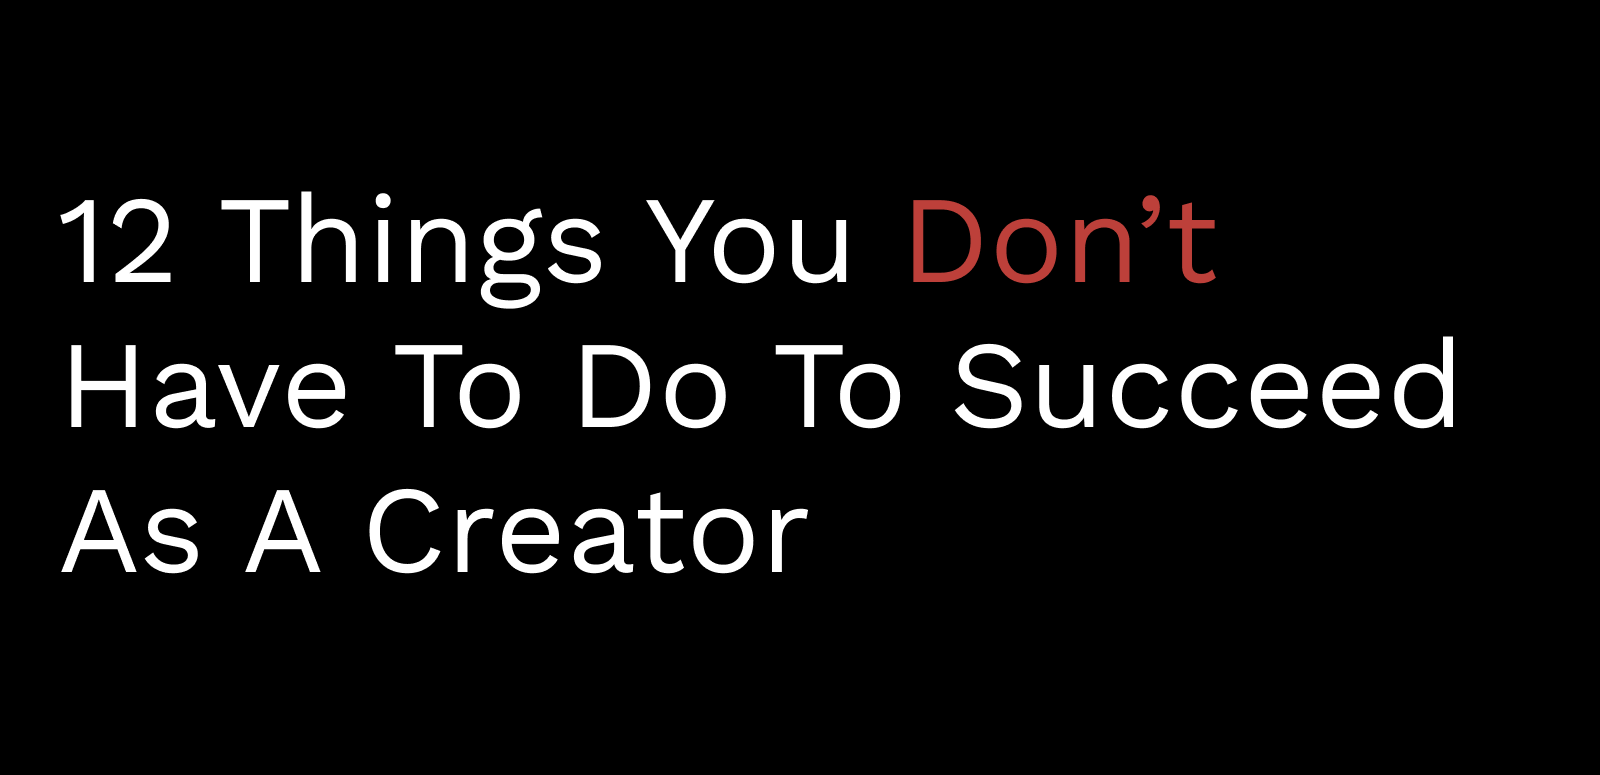 12 Things You Don't Have To Do To Succeed As A Creator